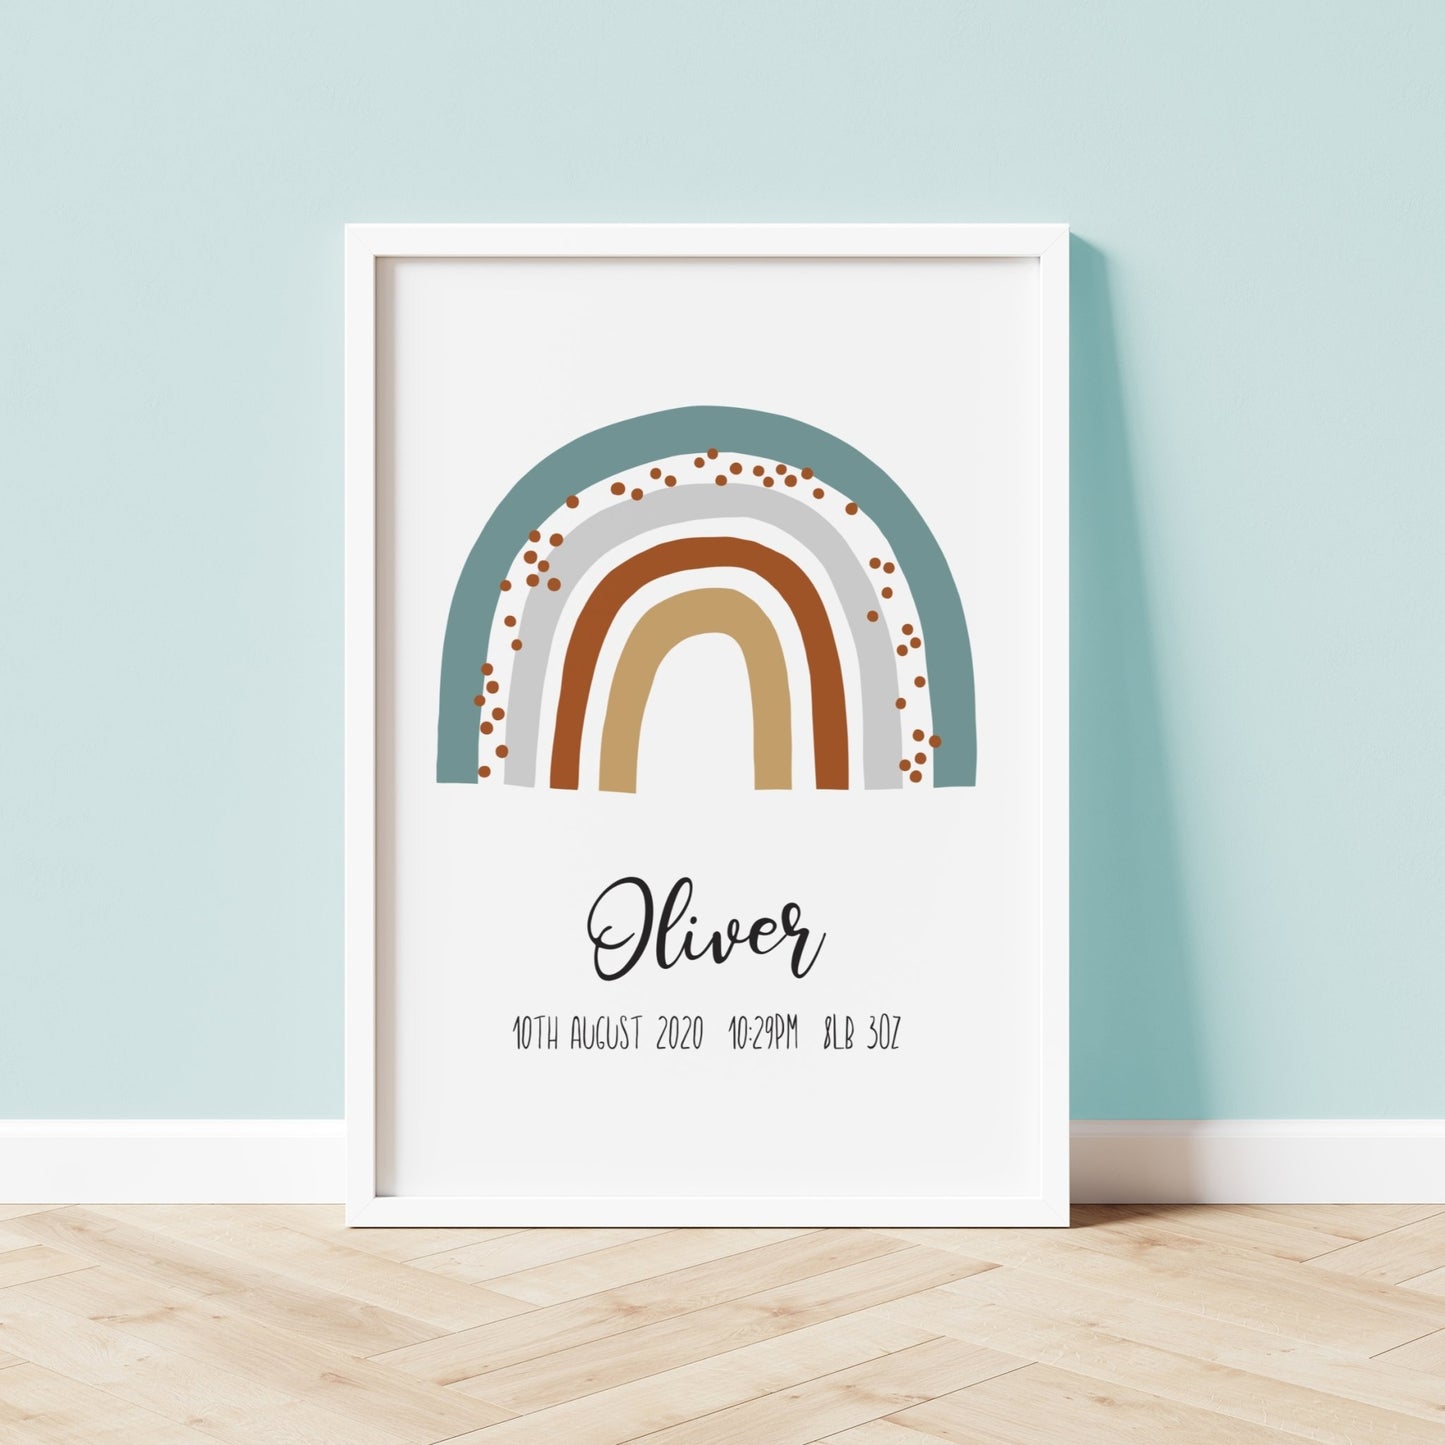 Pastel Rainbow Print with birth details - Dolly and Fred Designs